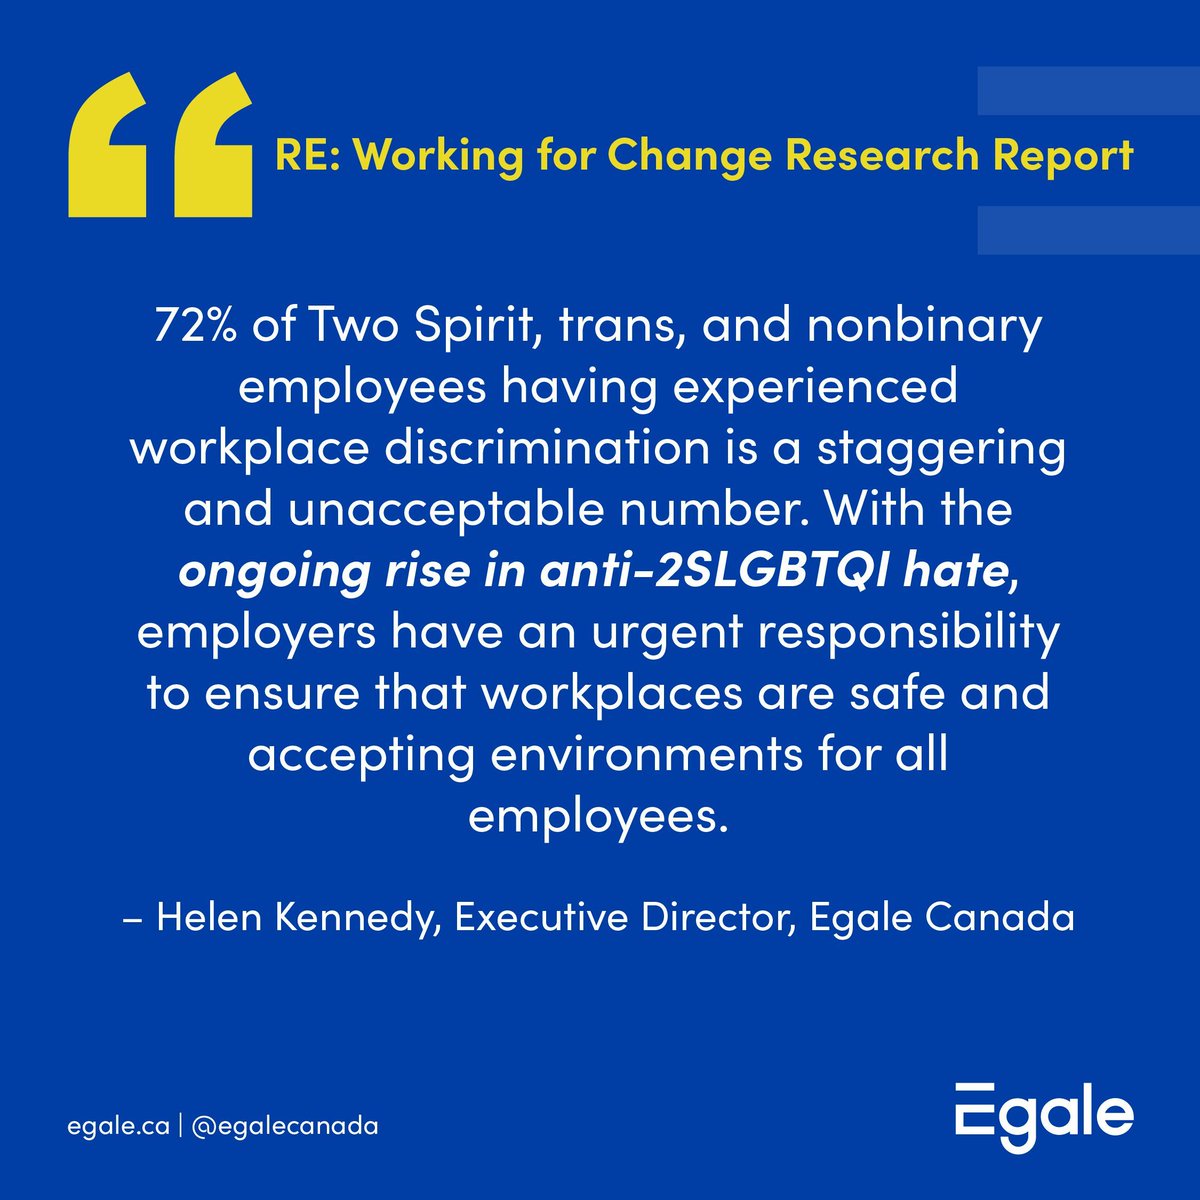 Working for Change research report provides recommendations for employers, workplace allies, & governments on how to address discrimination and inequities, & foster affirming, inclusive, & safe workplace environments for 2STNB people in Canada. visit ➡️ egale.ca/wfc